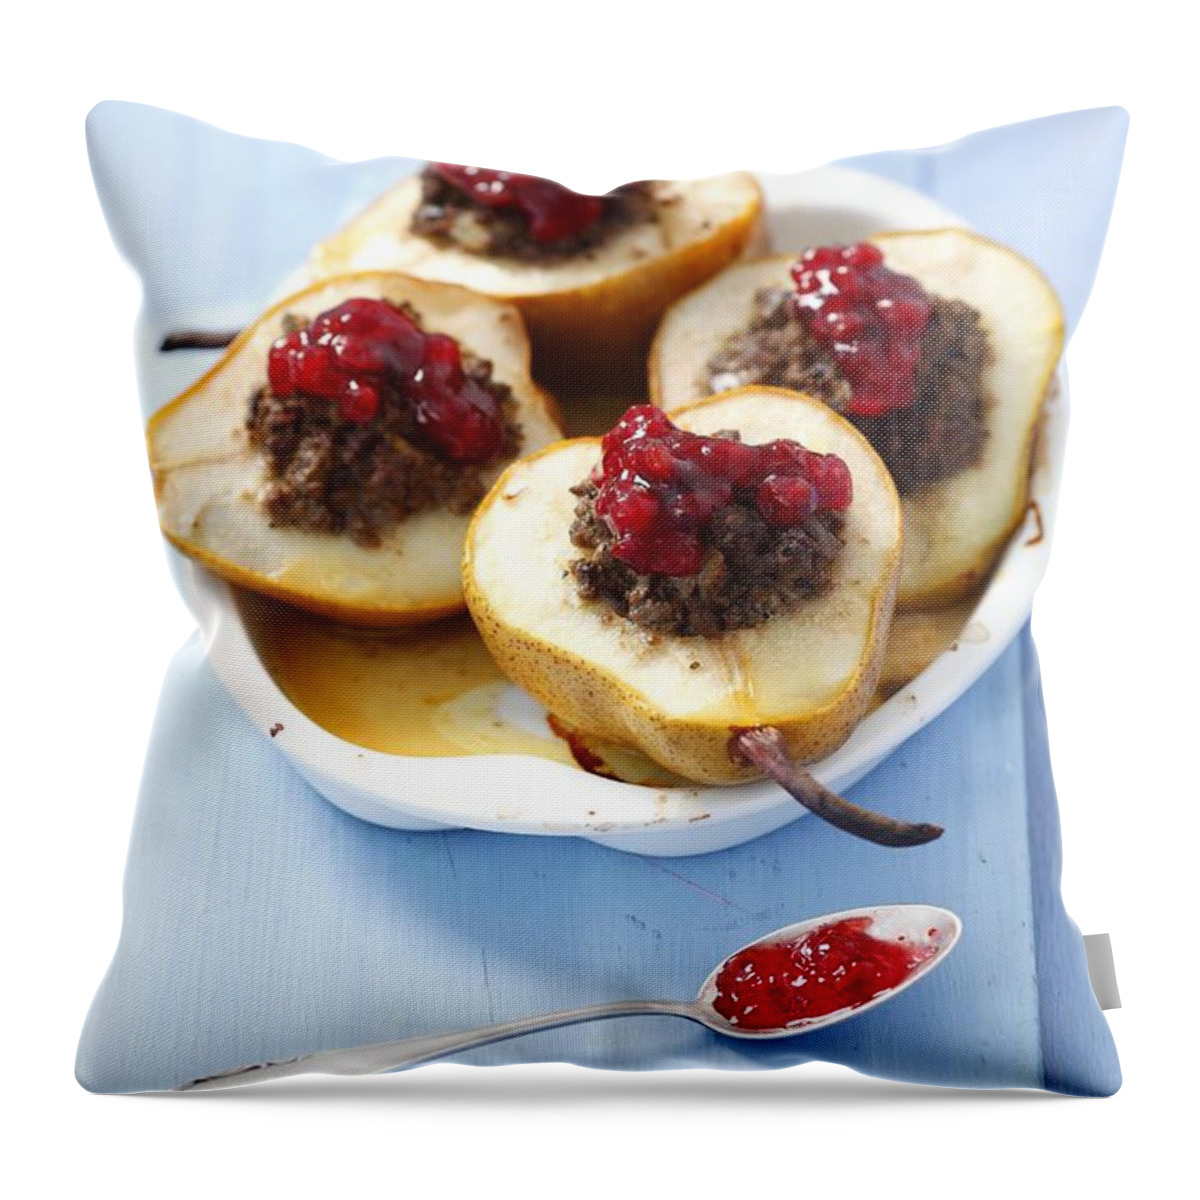 Ip_11215775 Throw Pillow featuring the photograph Pears Filled With Chicken Livers And Cranberries by Rua Castilho